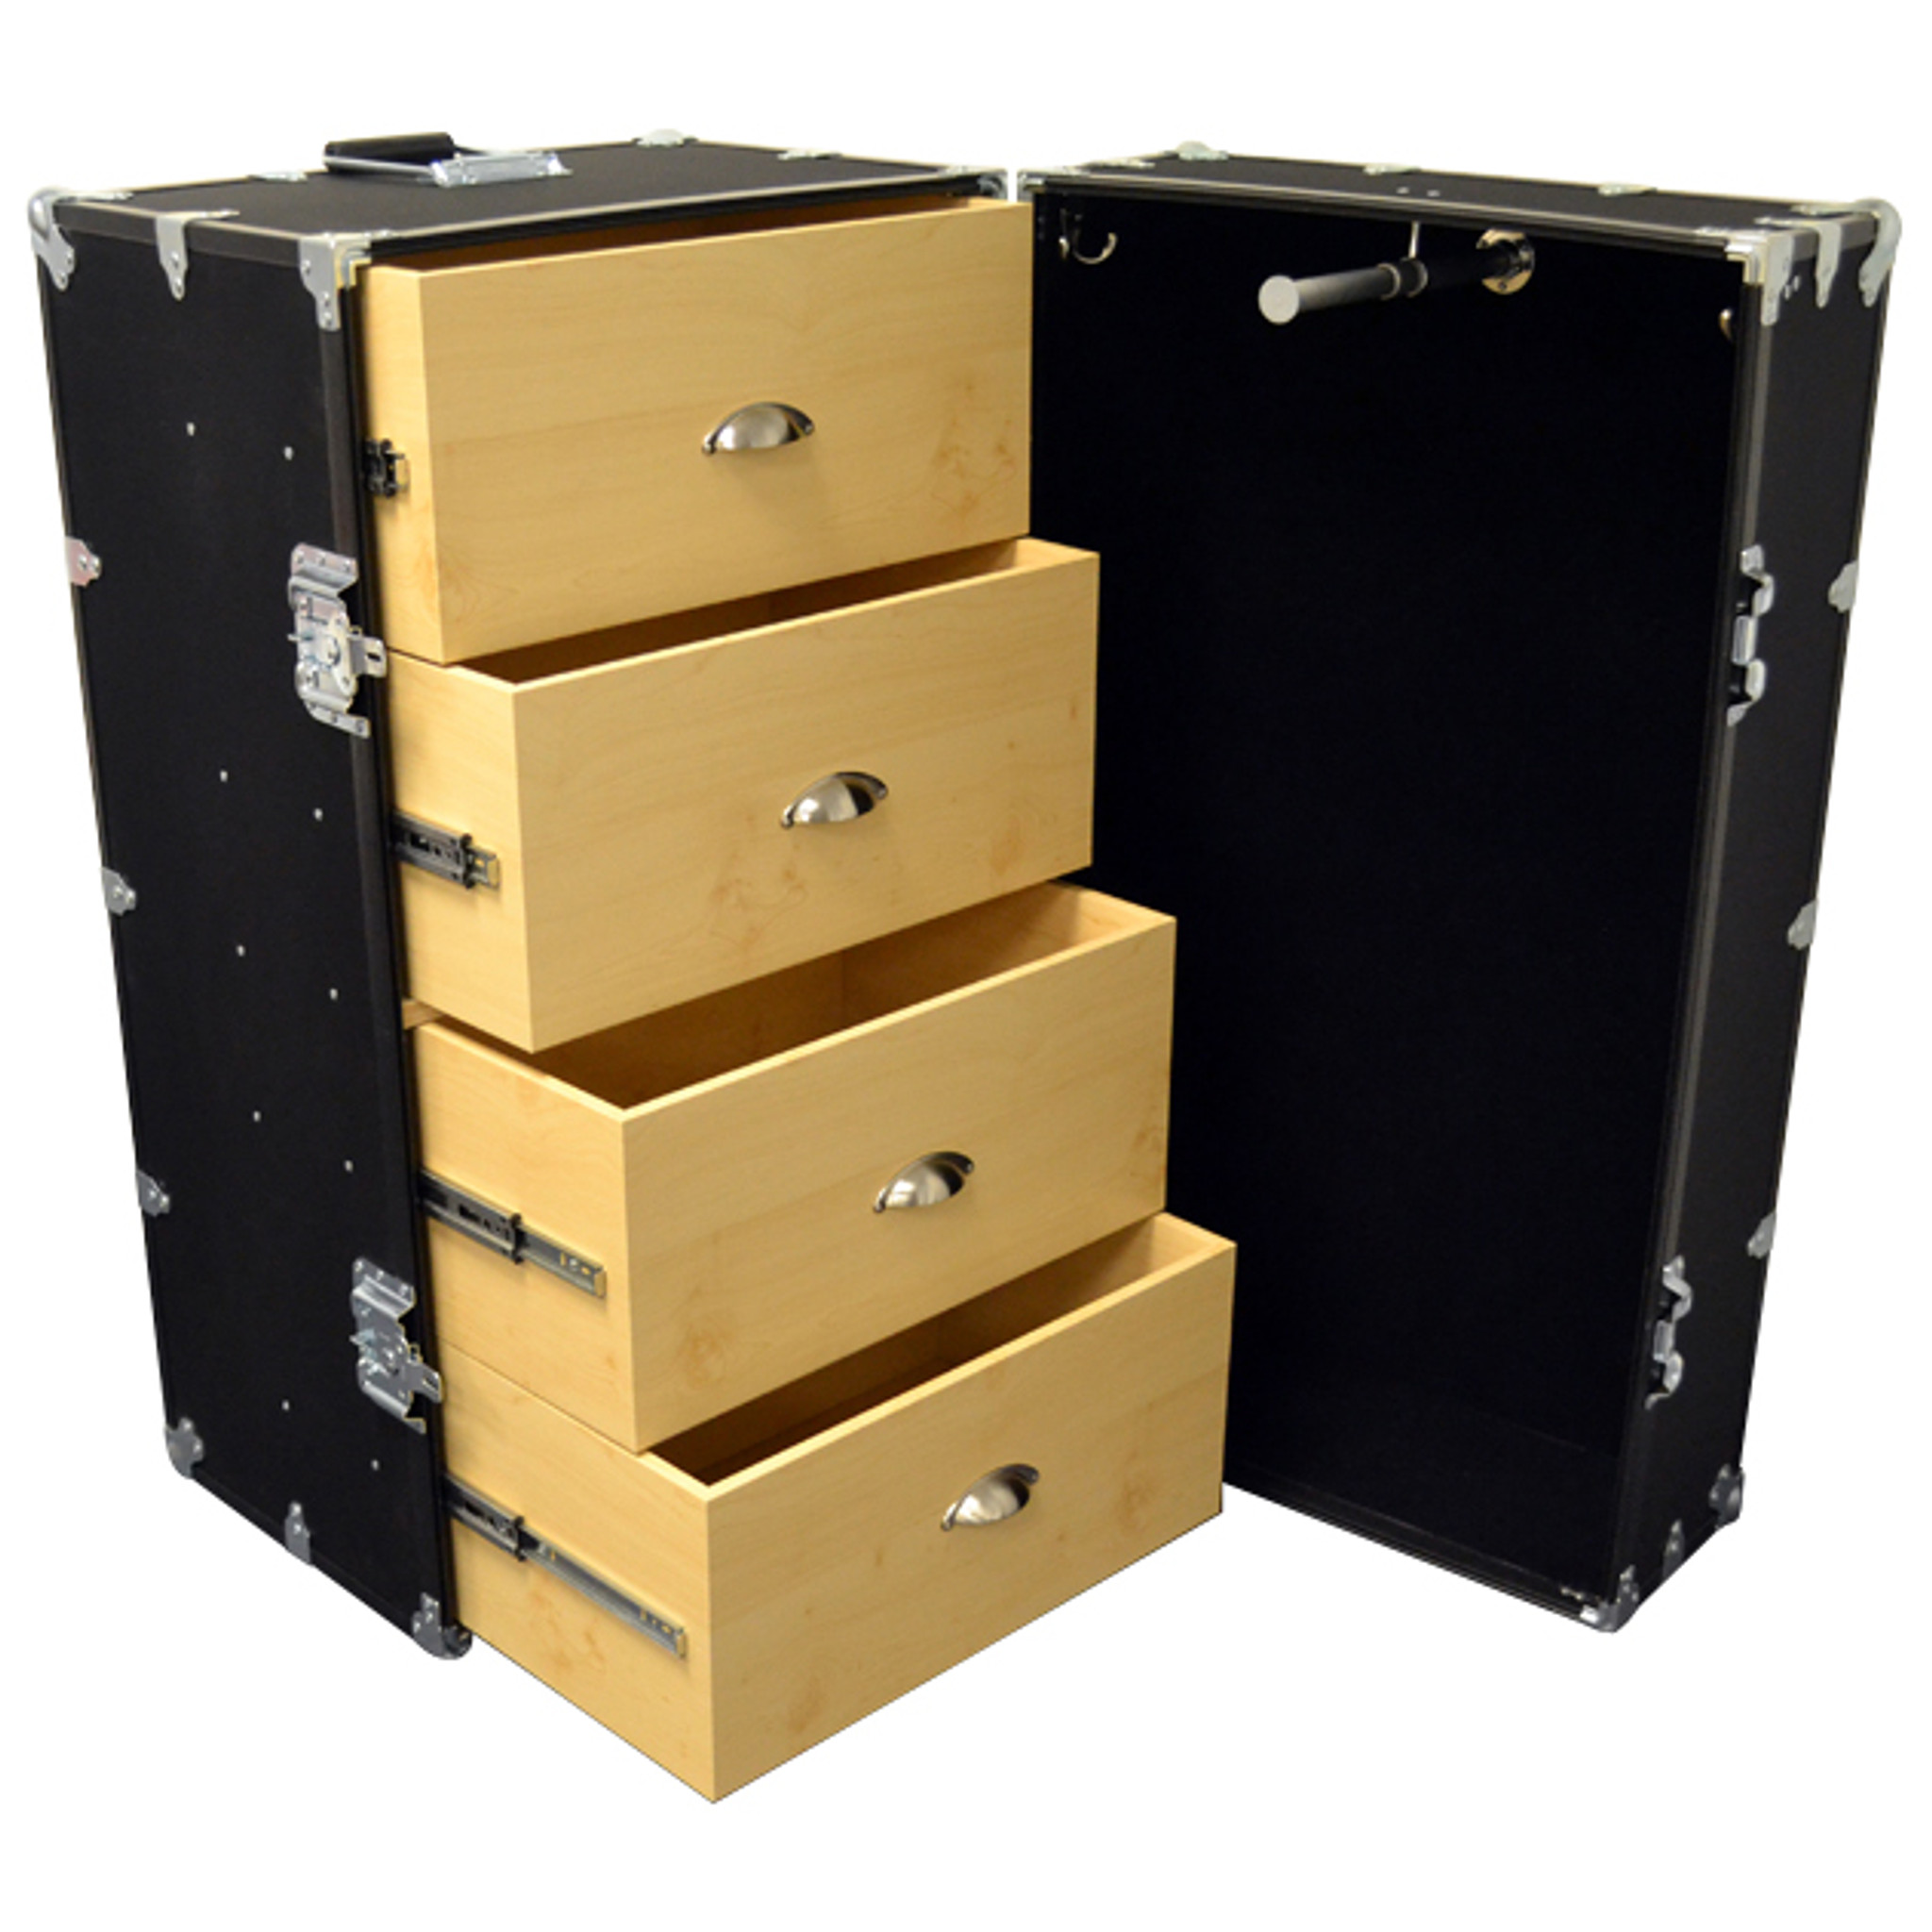 This wardrobe trunk, called a wardrobe, is magnificent for storing